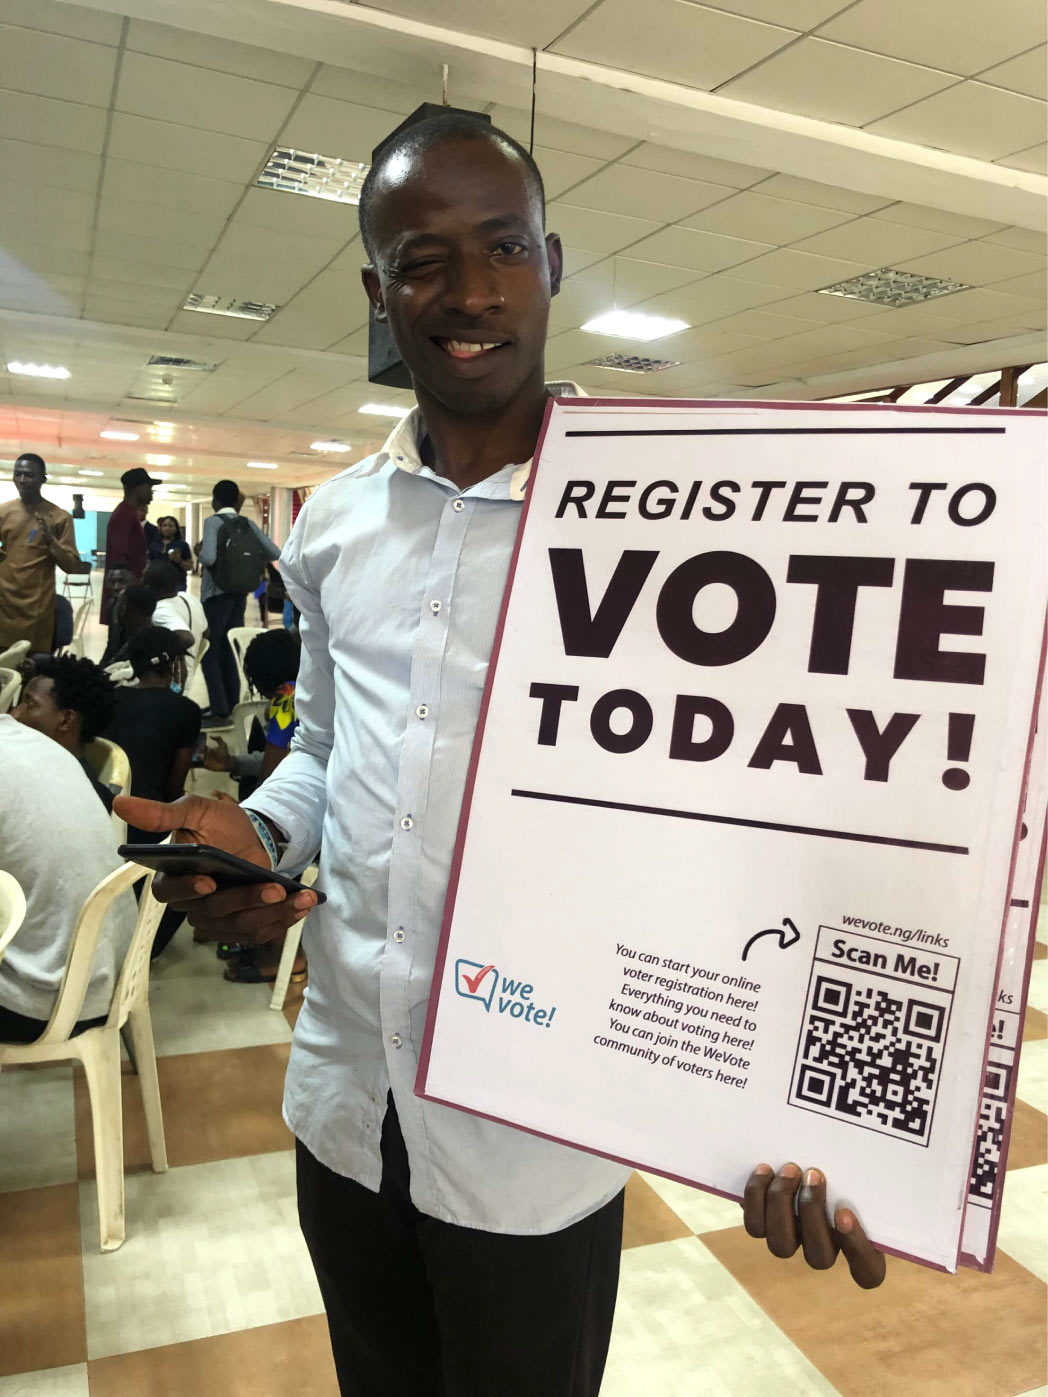 WeVote targets youth and first time voters at RCCG with voter education, awareness and registration